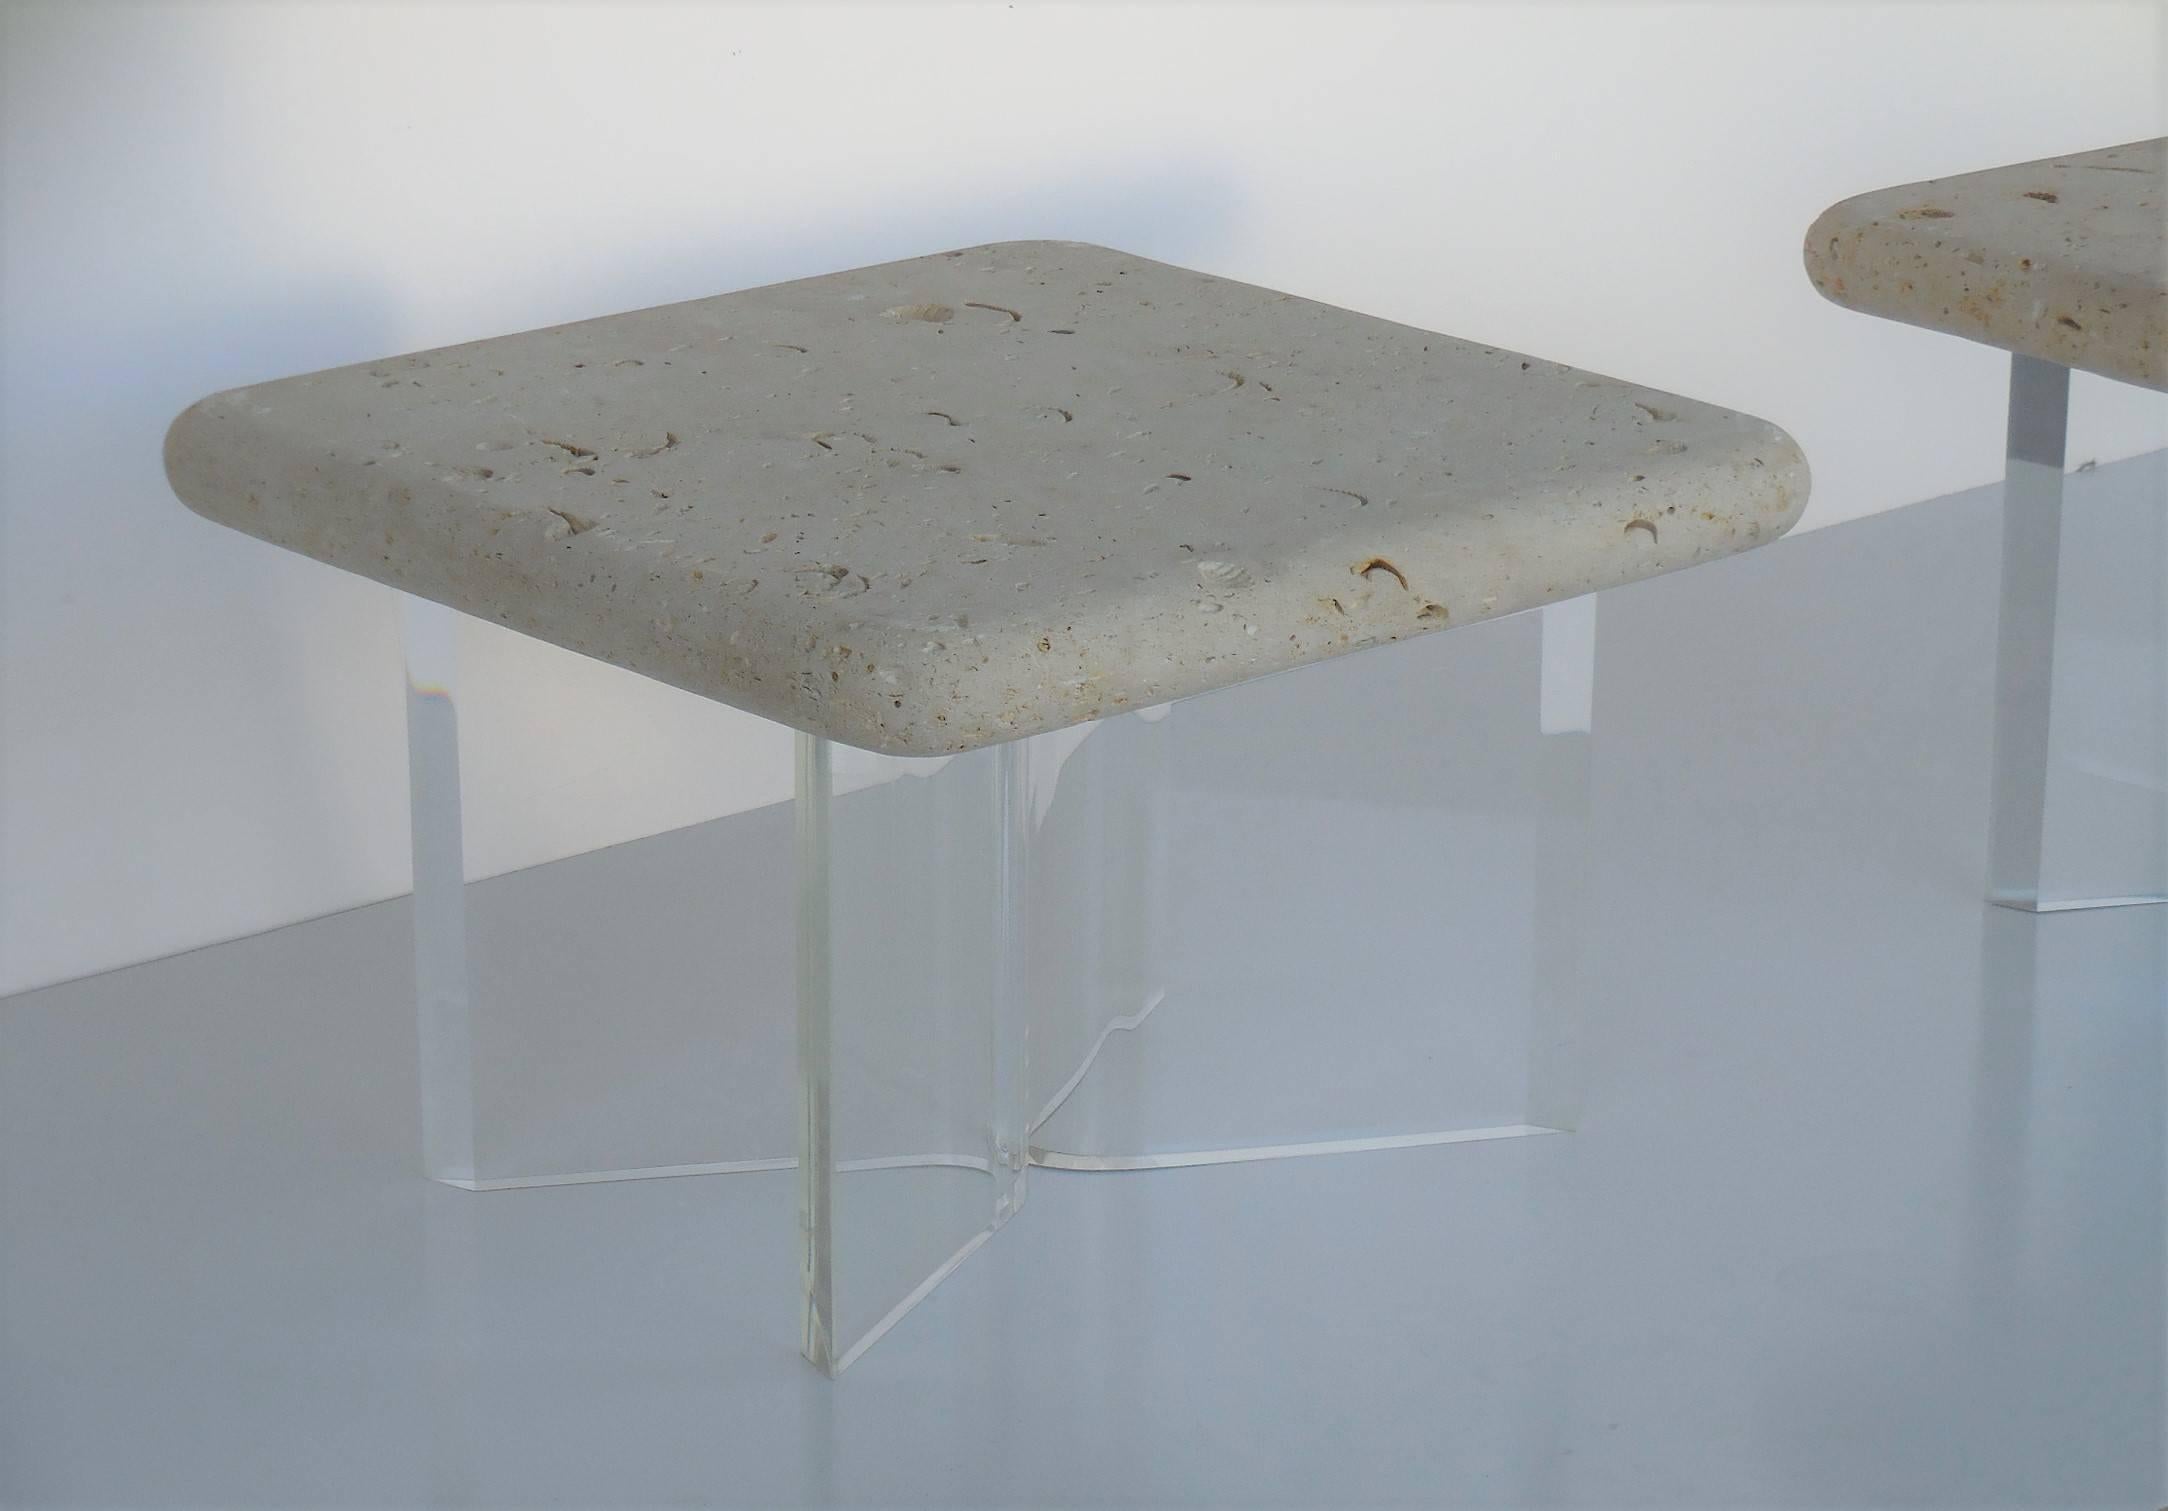 A pair of Lucite and fossil stone side tables from the 1970s. Thick planks of solid fossil stone rest on robust Lucite bases. The fossil stone tops are 2.5